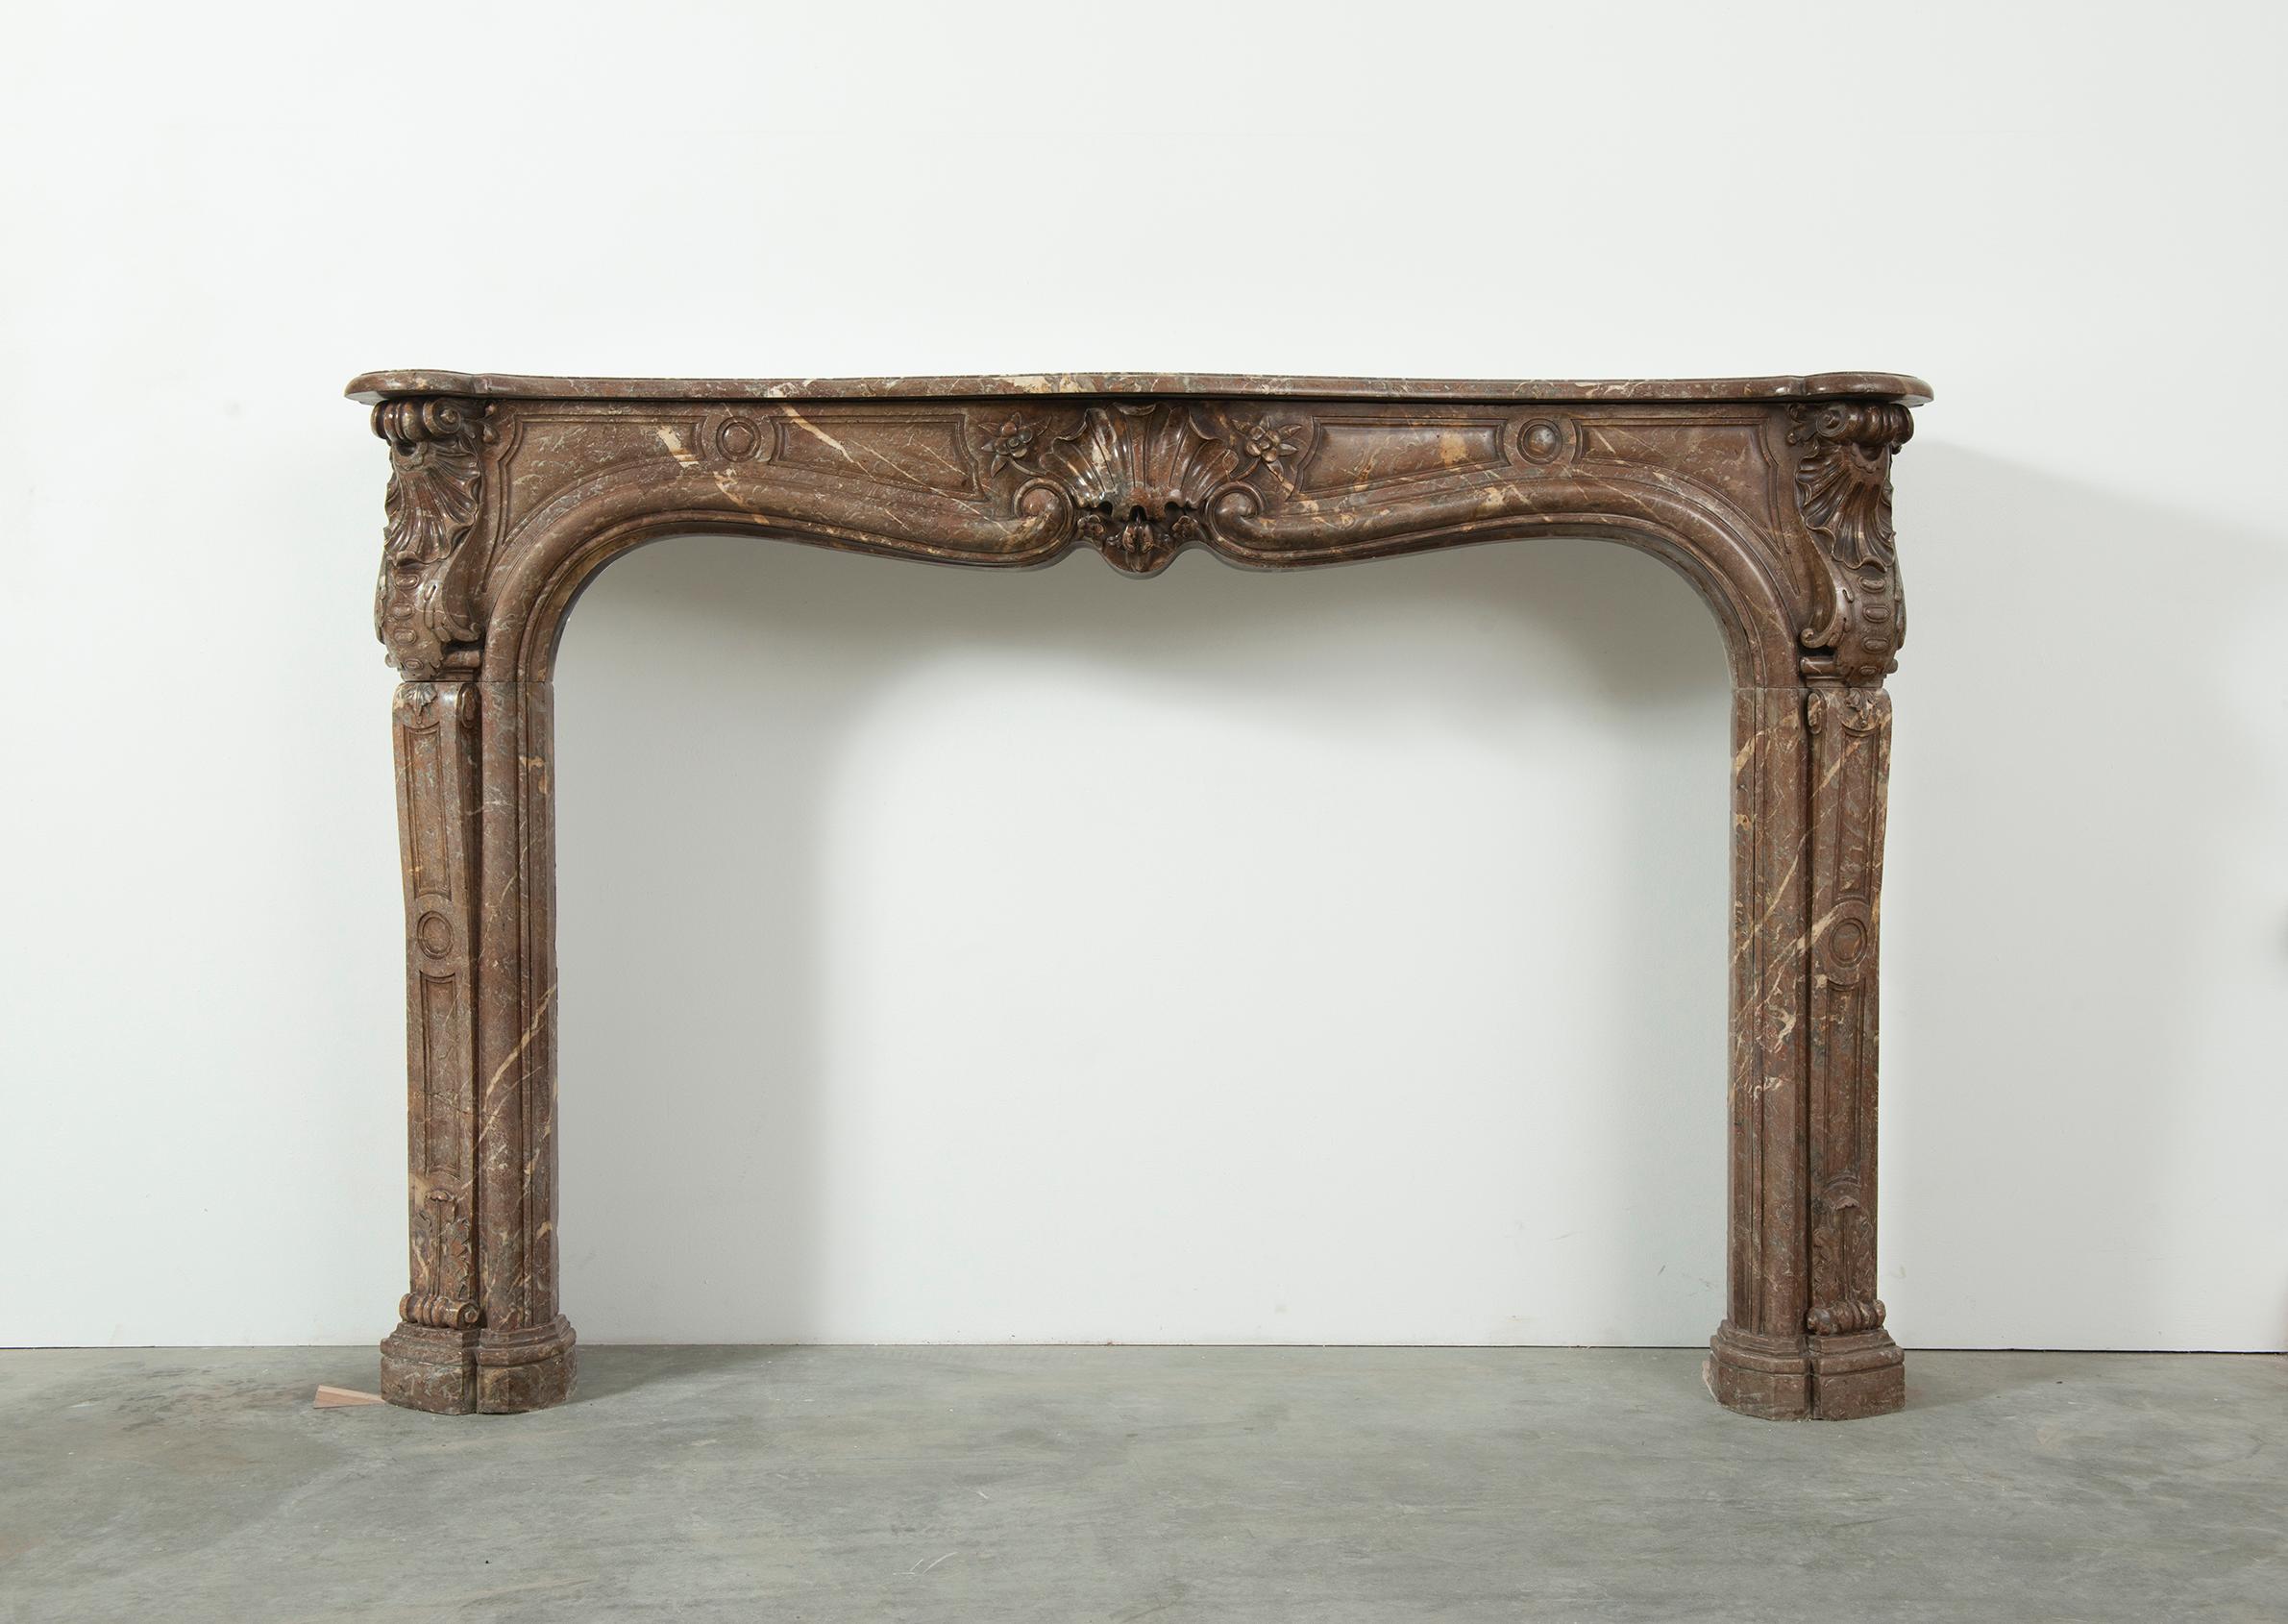 French 18th Century Louis XV Fireplace mantel in red marble 

A very attractive and well-proportioned French Louis XV fireplace, in Belgian red marble.
Beautifully carved central cartouche between to S-scrolled endblocks descending on shaped and